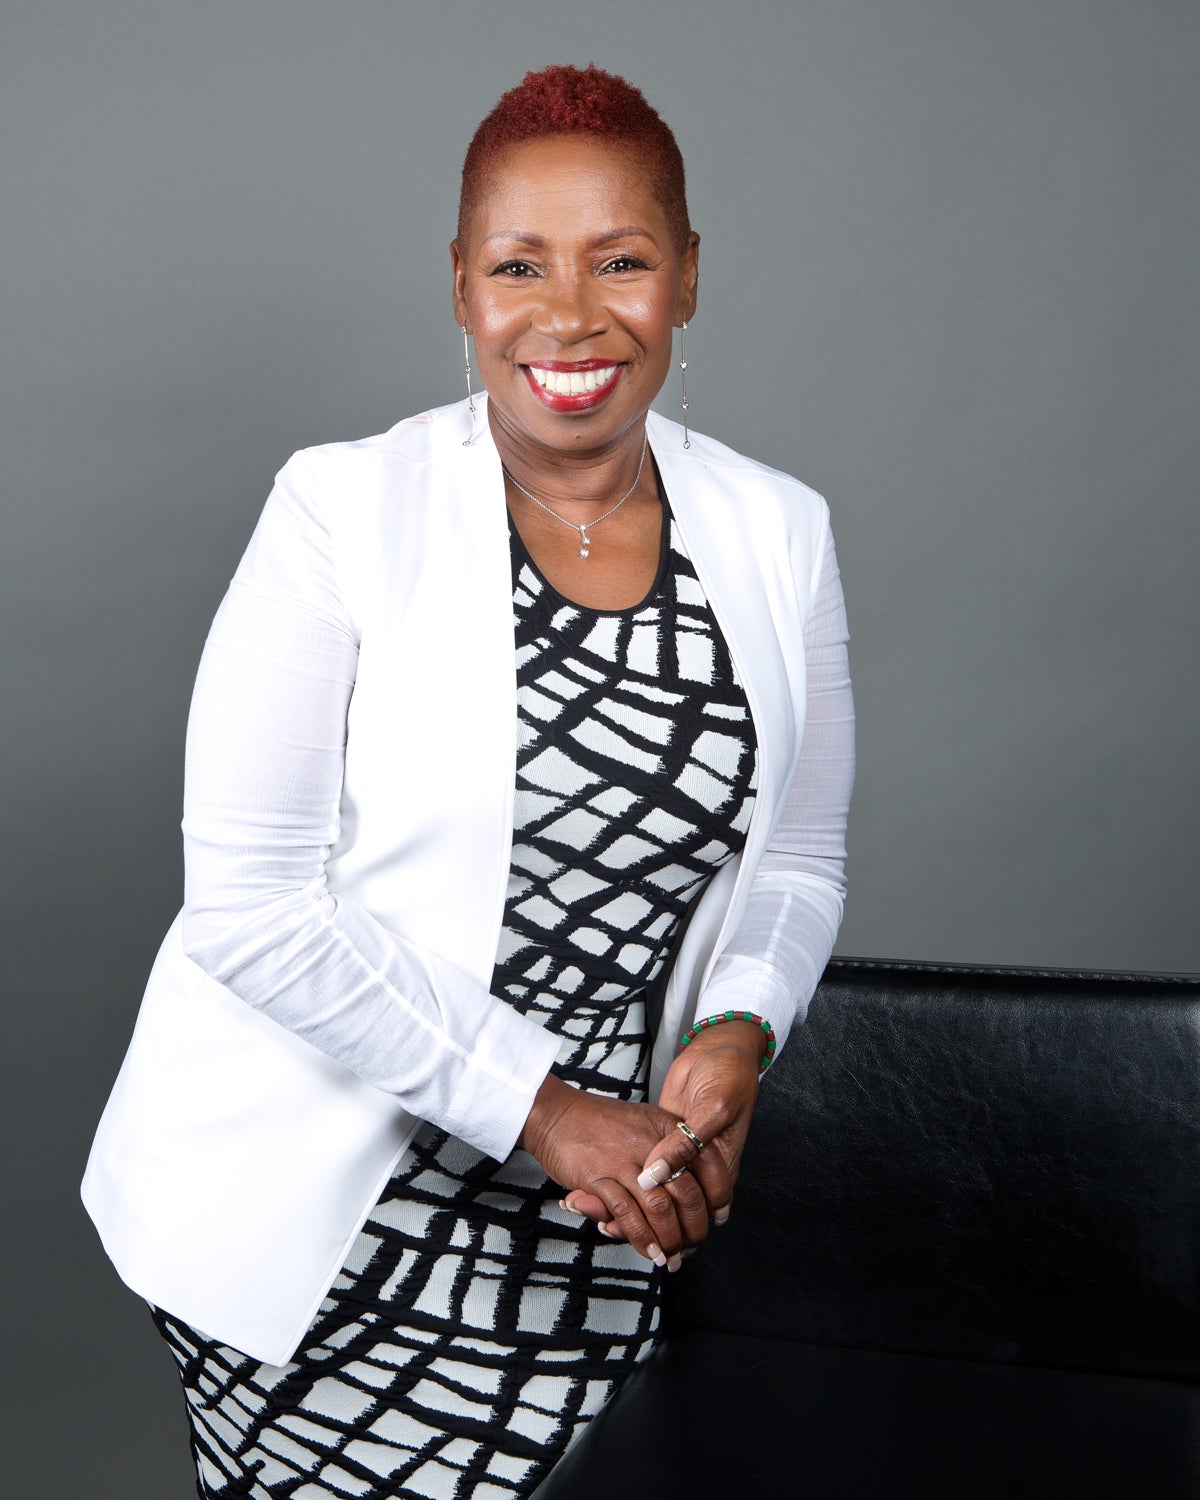 Iyanla Vanzant’s Two Cents On Whether To Leave It Alone or Fix It